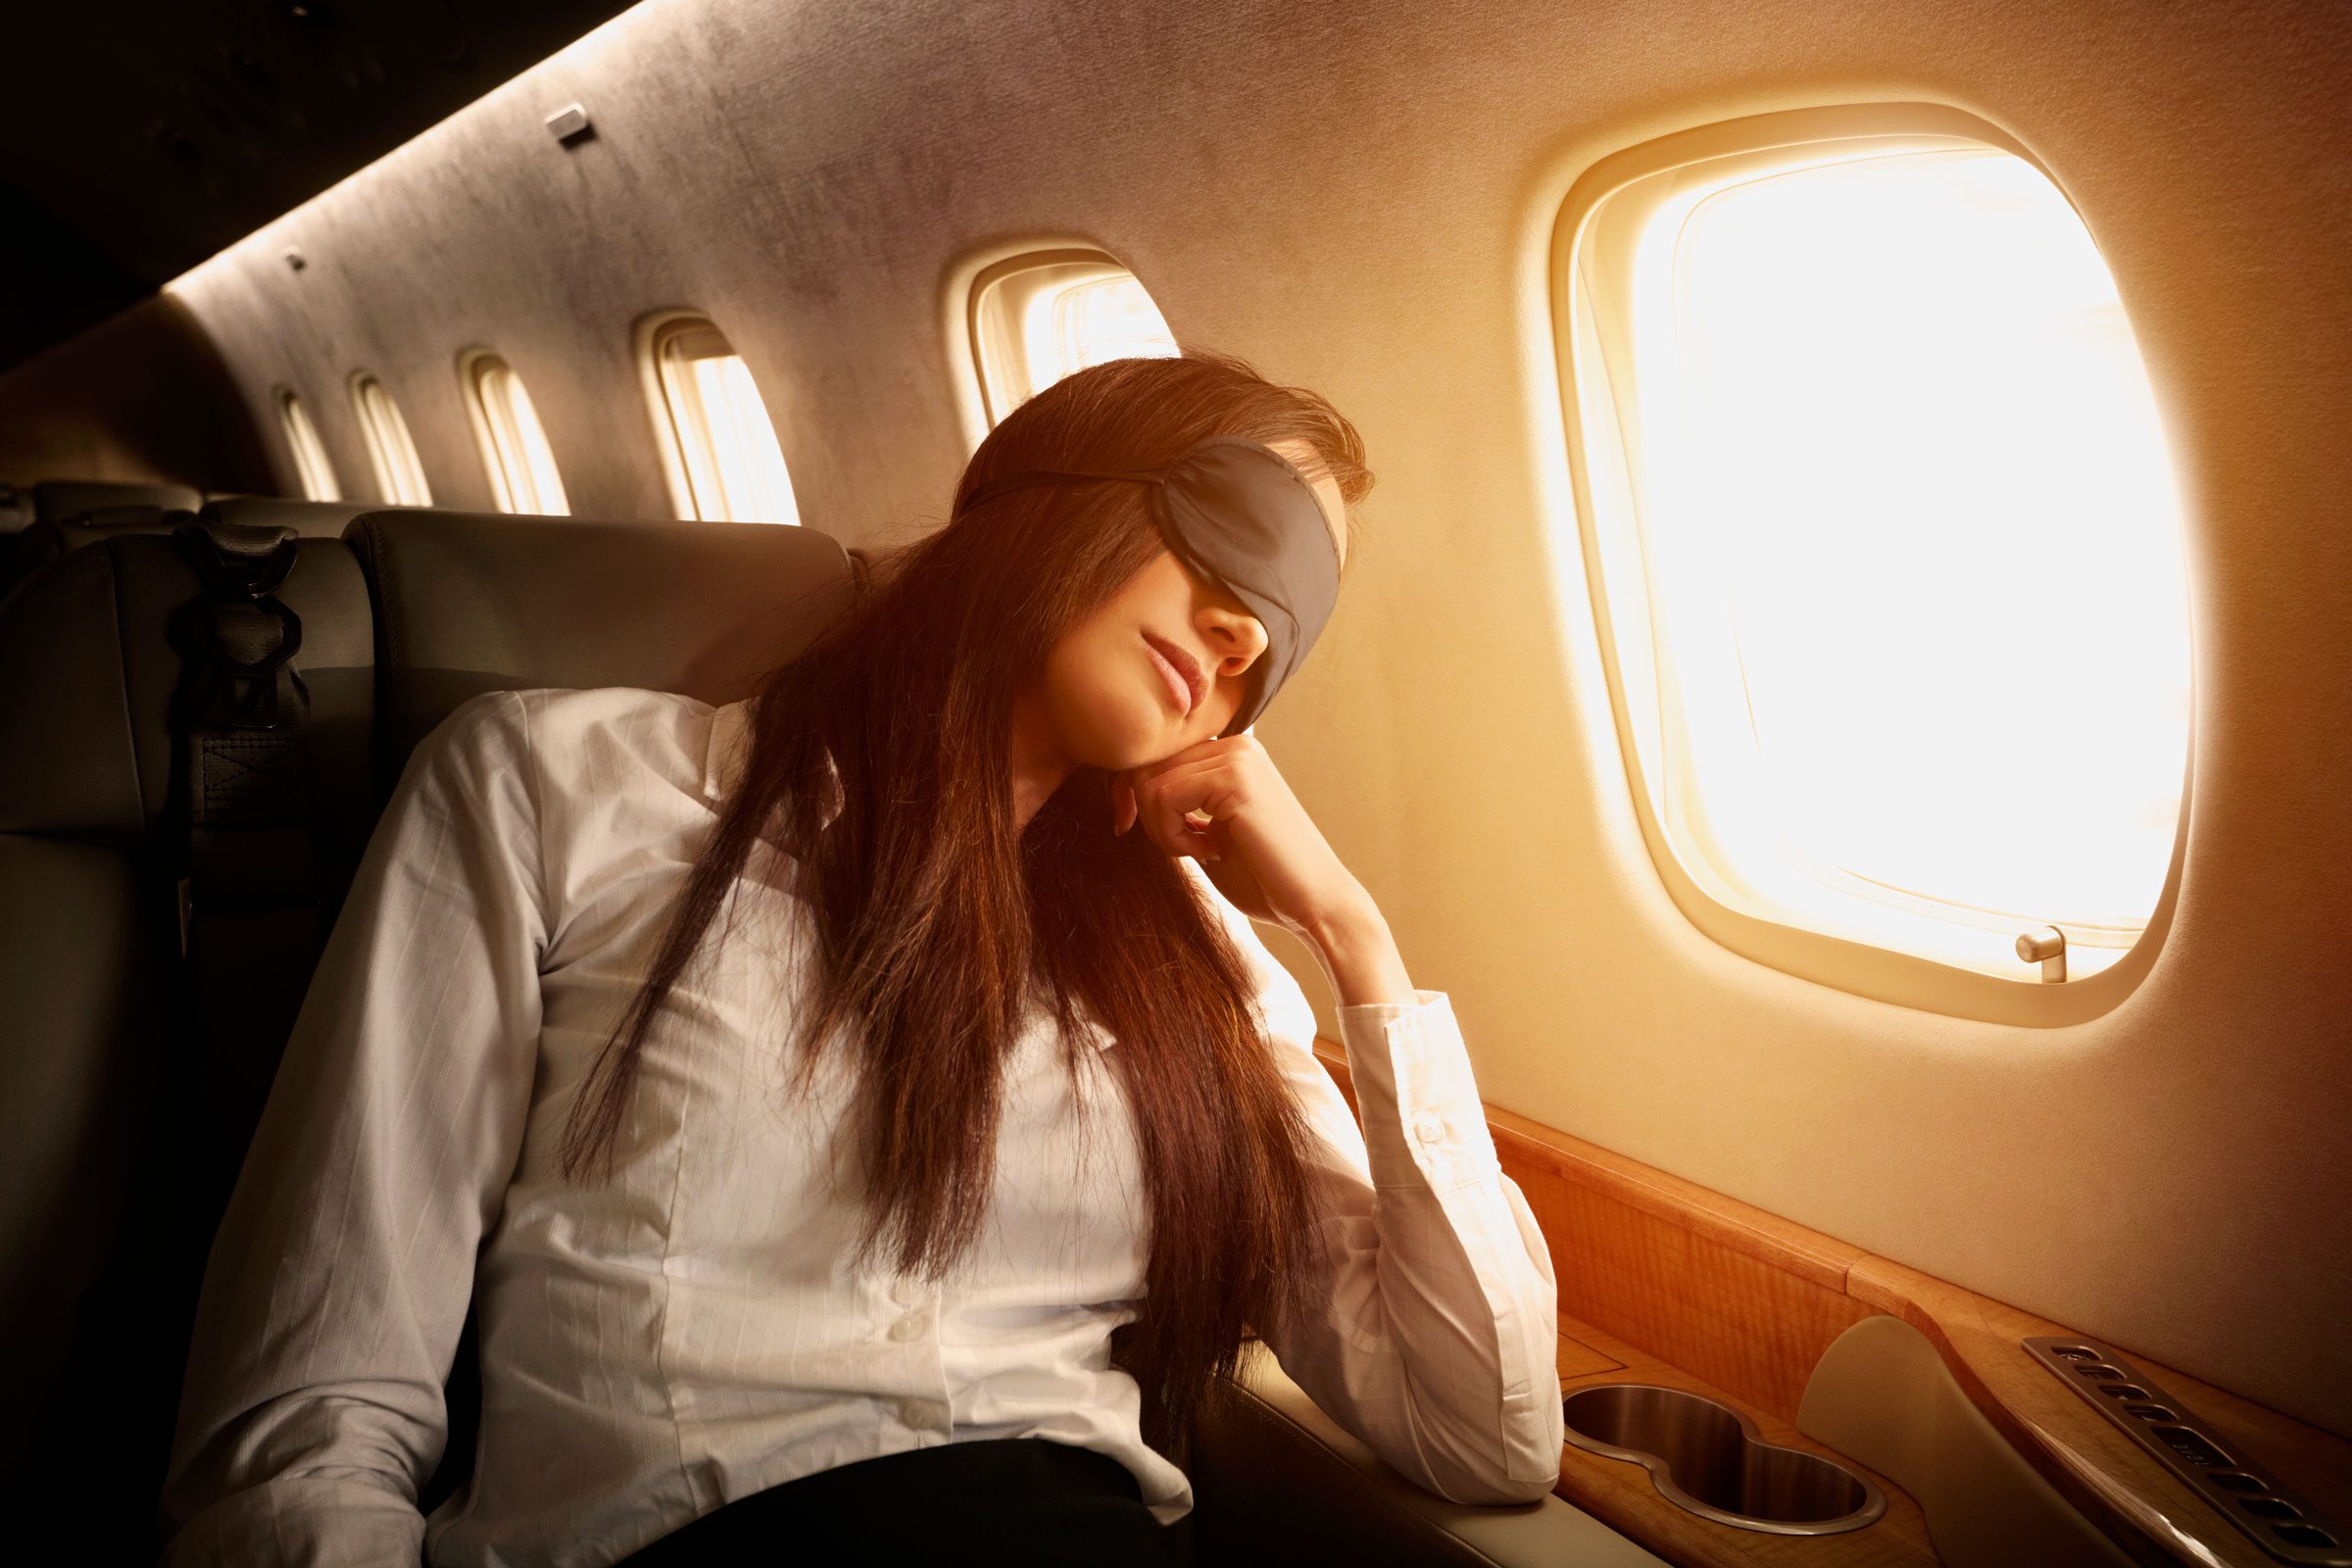 How to Sleep on a Plane: 12 Tips from Experts and Frequent Fliers